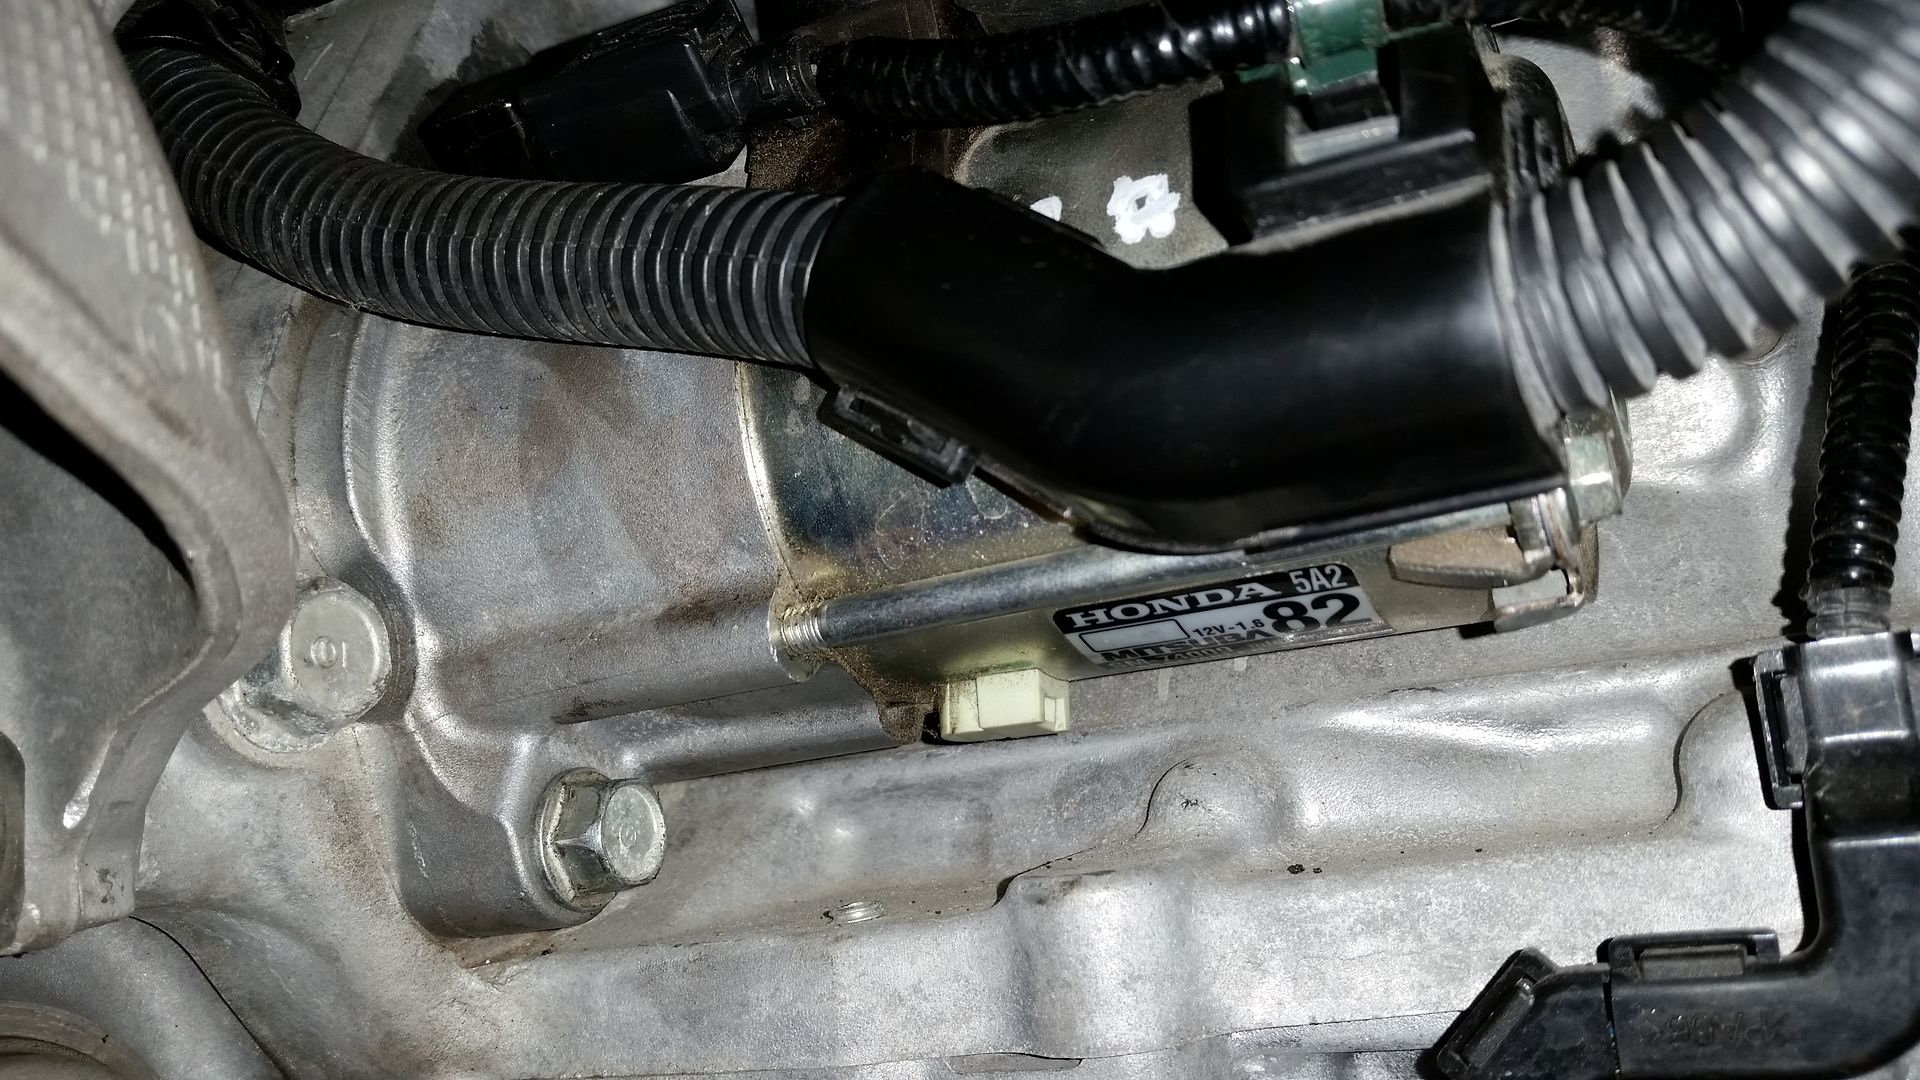 2014 Honda Accord 4 Cylinder Starter Replacement - Goimages Base